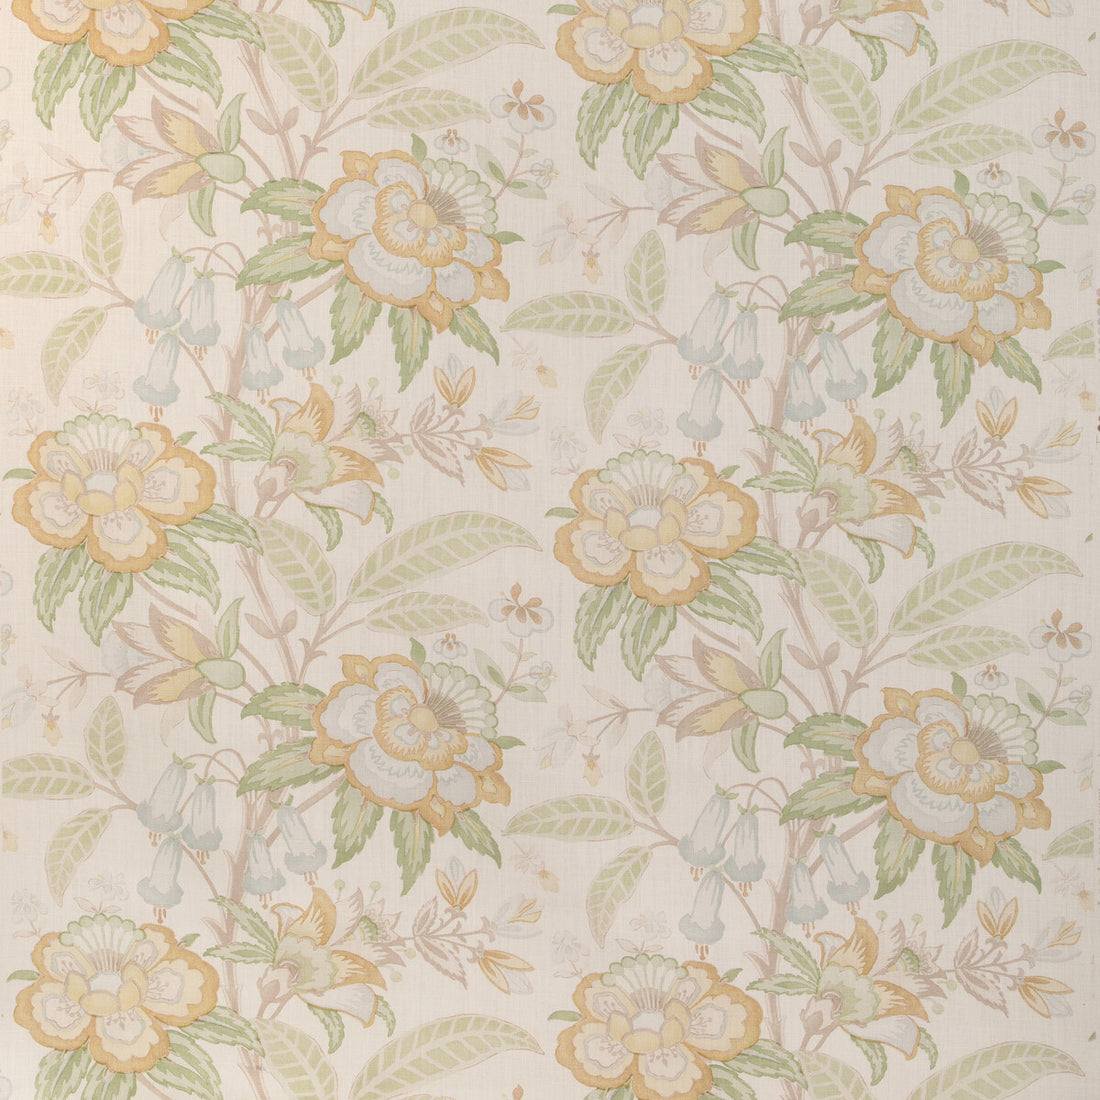 Davenport Print fabric in golden color - pattern 2017164.423.0 - by Lee Jofa in the Garden Walk collection